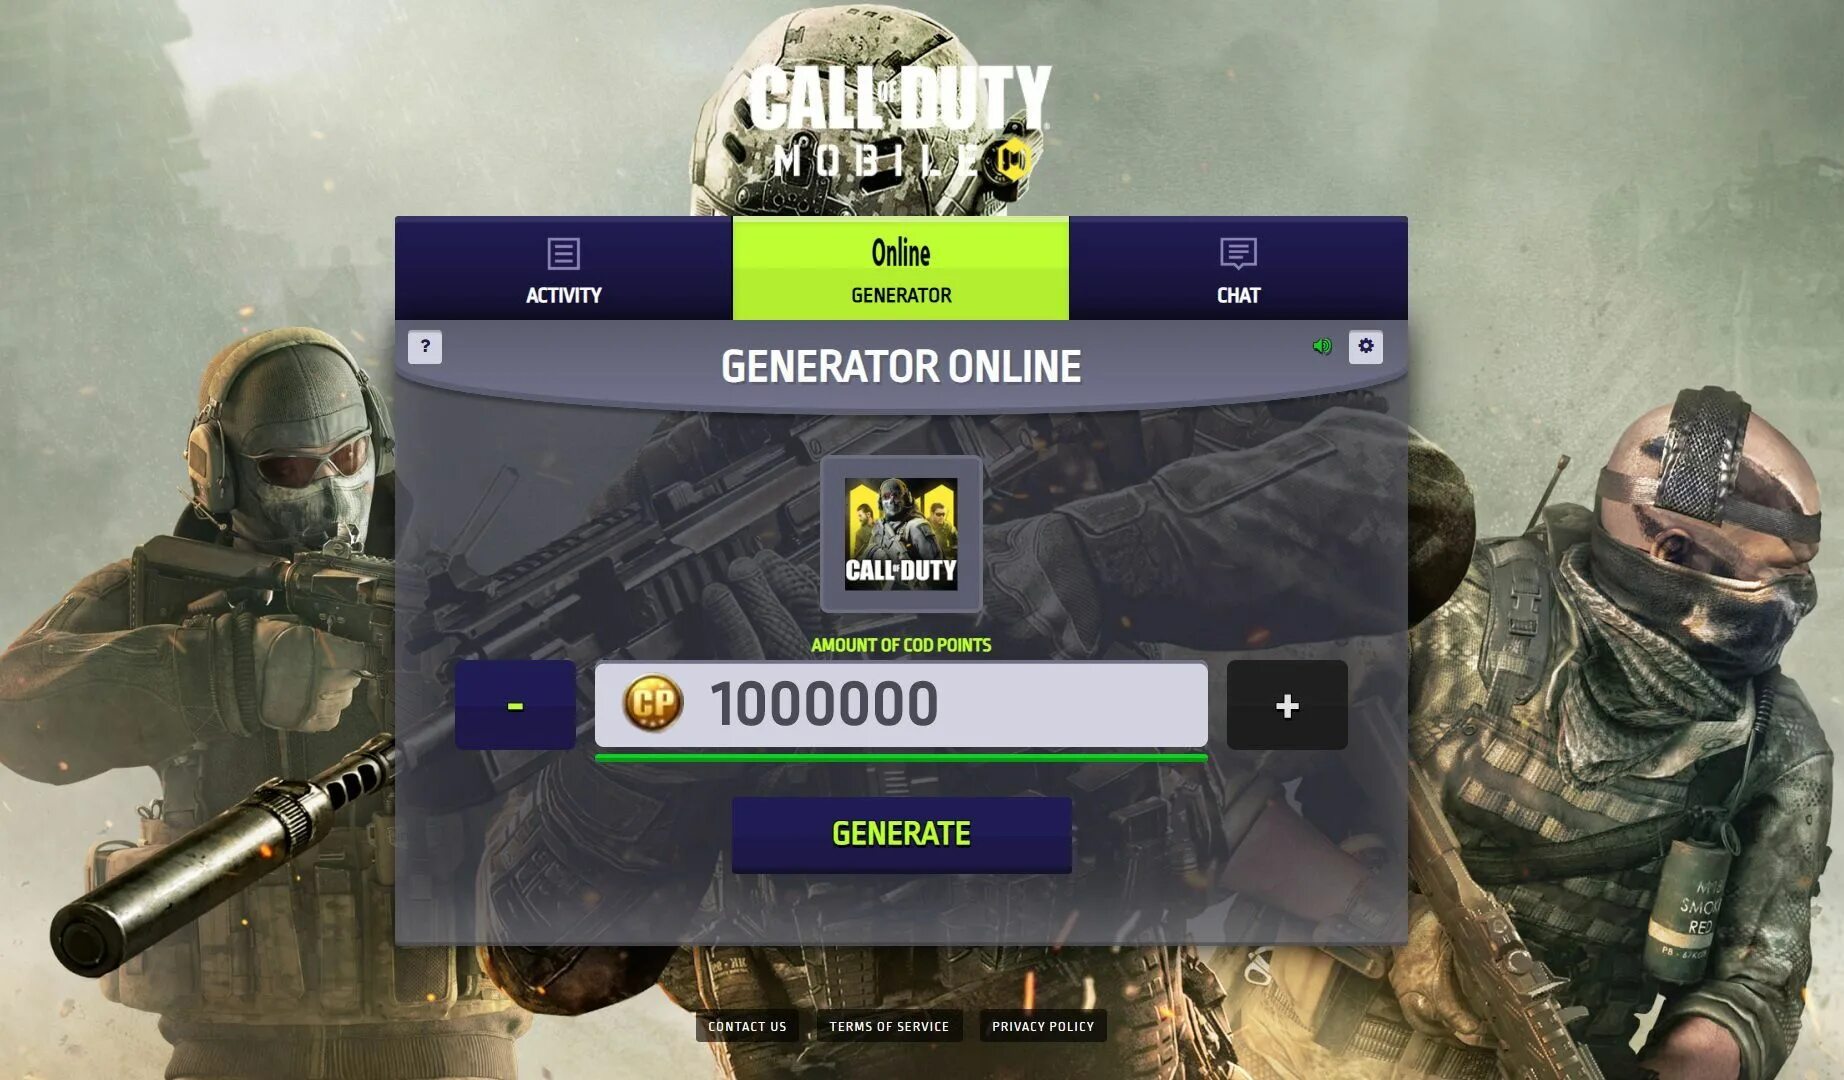 Call of duty mobile русская версия. Call of Duty mobile. Магазин Call of Duty mobile. Call of Duty mobile мобайл. Промокоды Cod mobile.